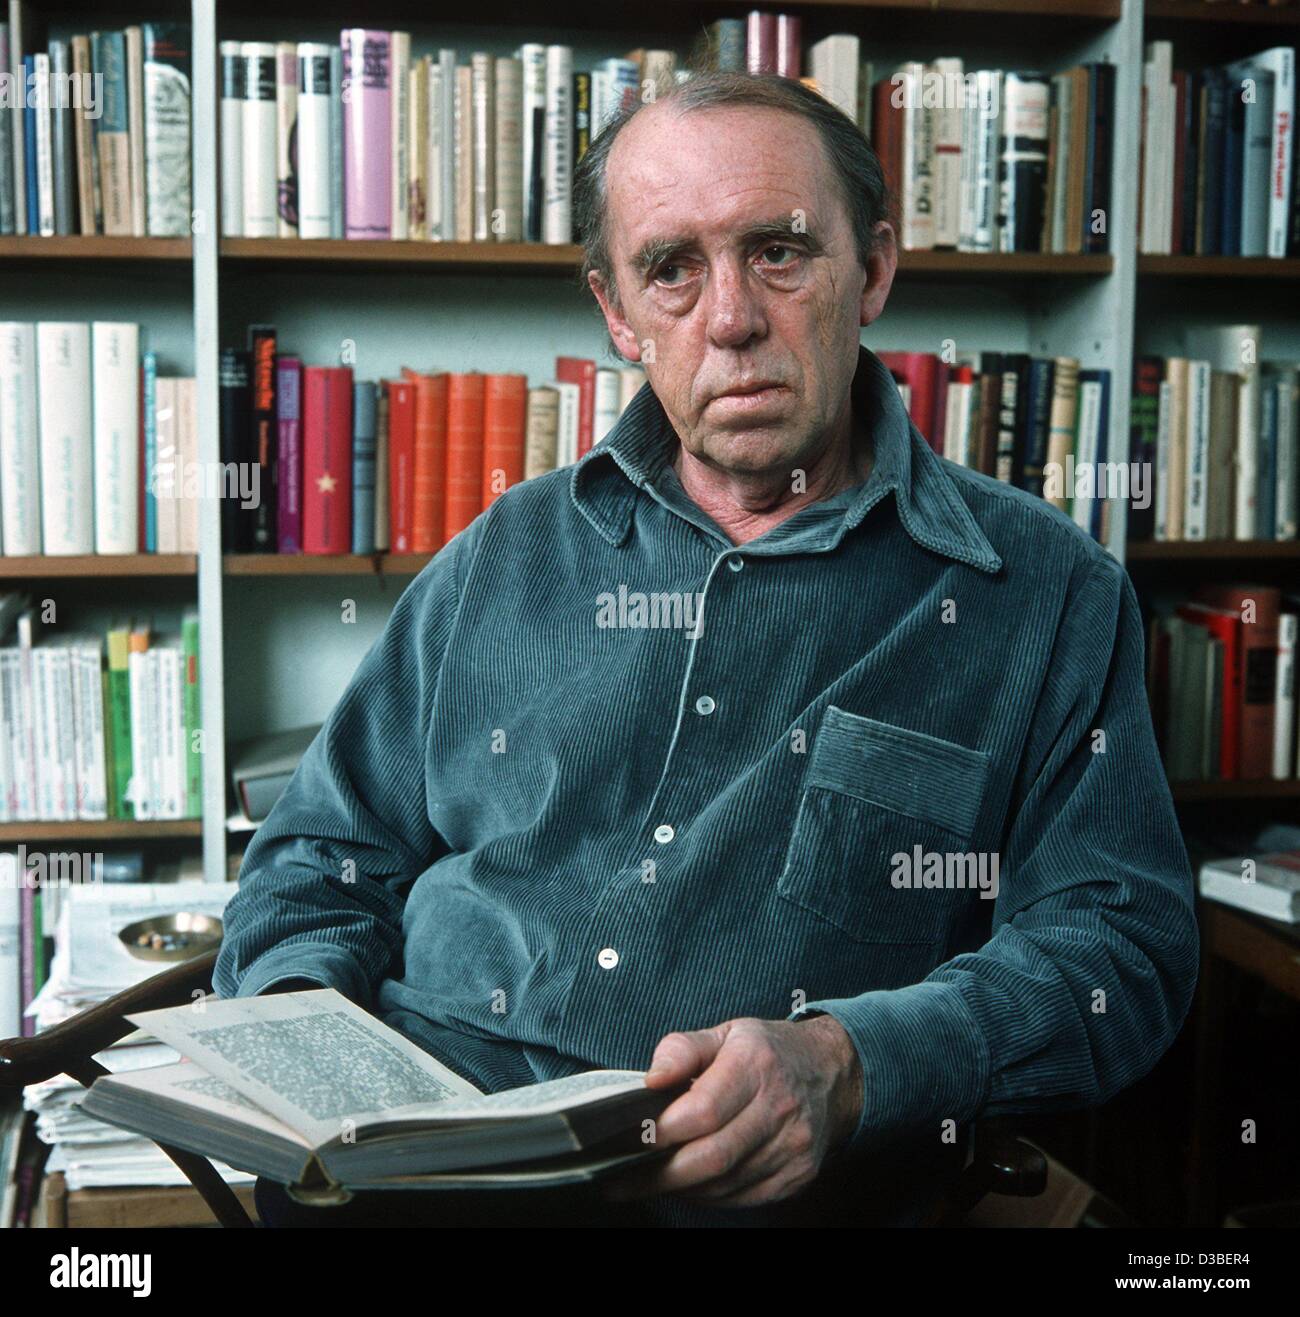 (dpa files) - German author Heinrich Boell in his apartment in Cologne, West Germany, December 1977. Boell was born 21 December 1917 in Cologne and died in Kreuzau, West Germany, 16 July 1985. In 1962 he received the Buechner Award and in 1972 the Noble Prize for Literature. Some of his famous works Stock Photo